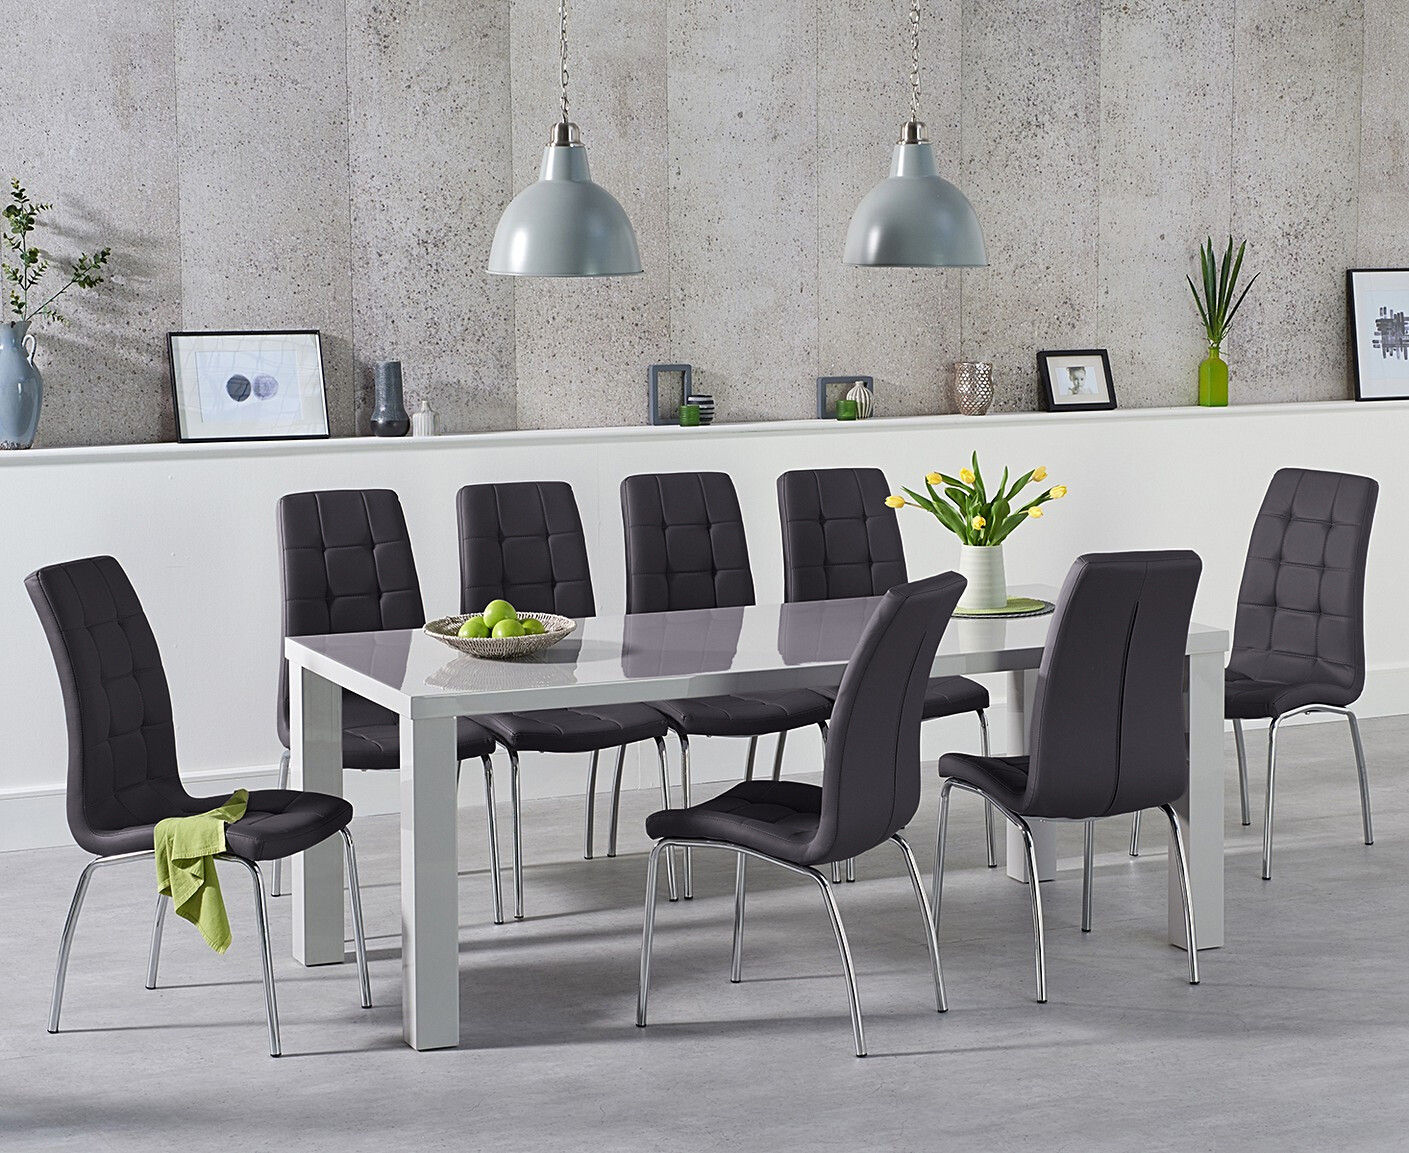 Photo 2 of Atlanta 200cm light grey high gloss dining table with 6 grey enzo chairs